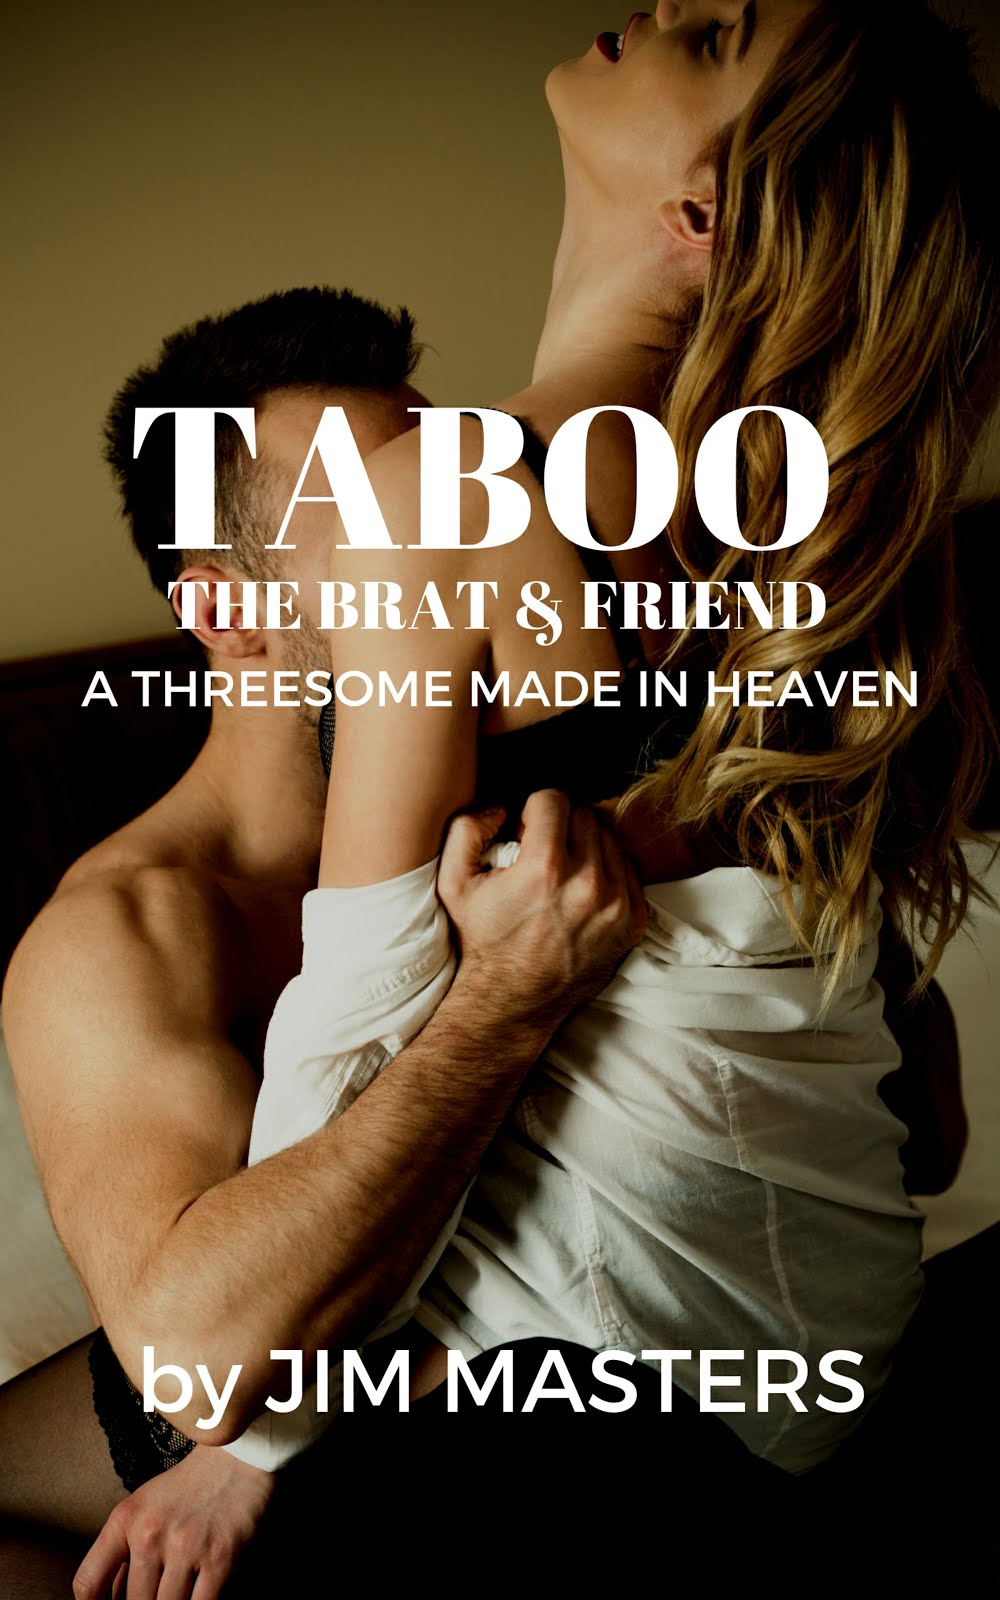 Taboo: The Brat and Friend